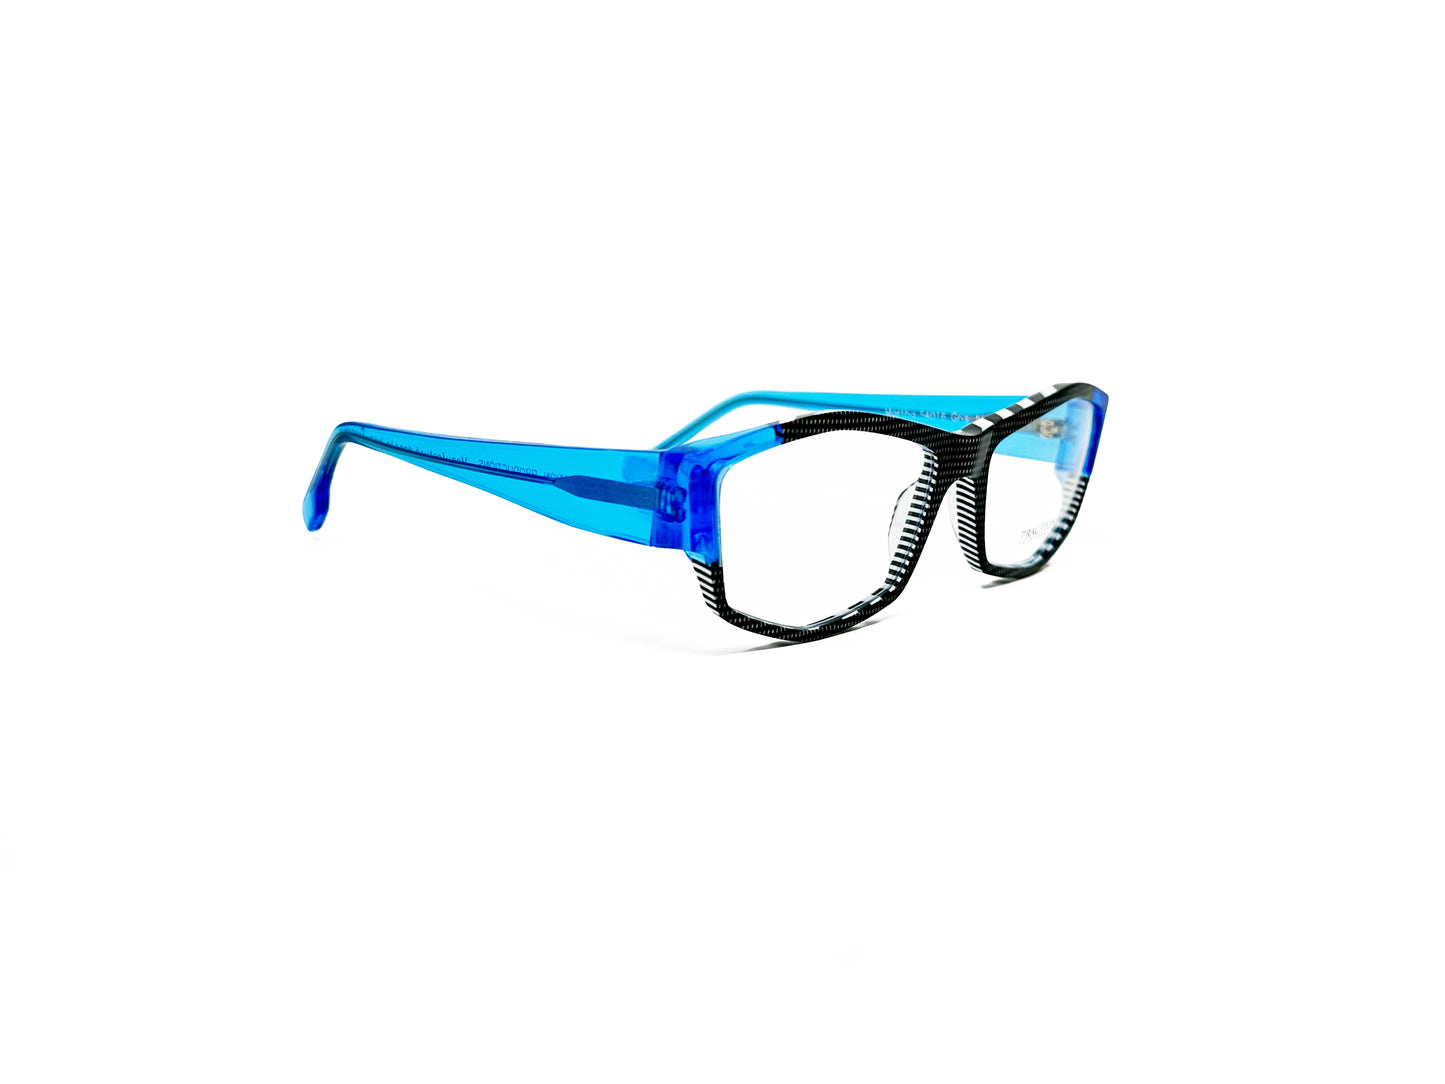 Traction angular acetate optical frame. Model: Martha. Color: Gris Bleu - Black and white polka dots with blue on corners and temples. Side view.